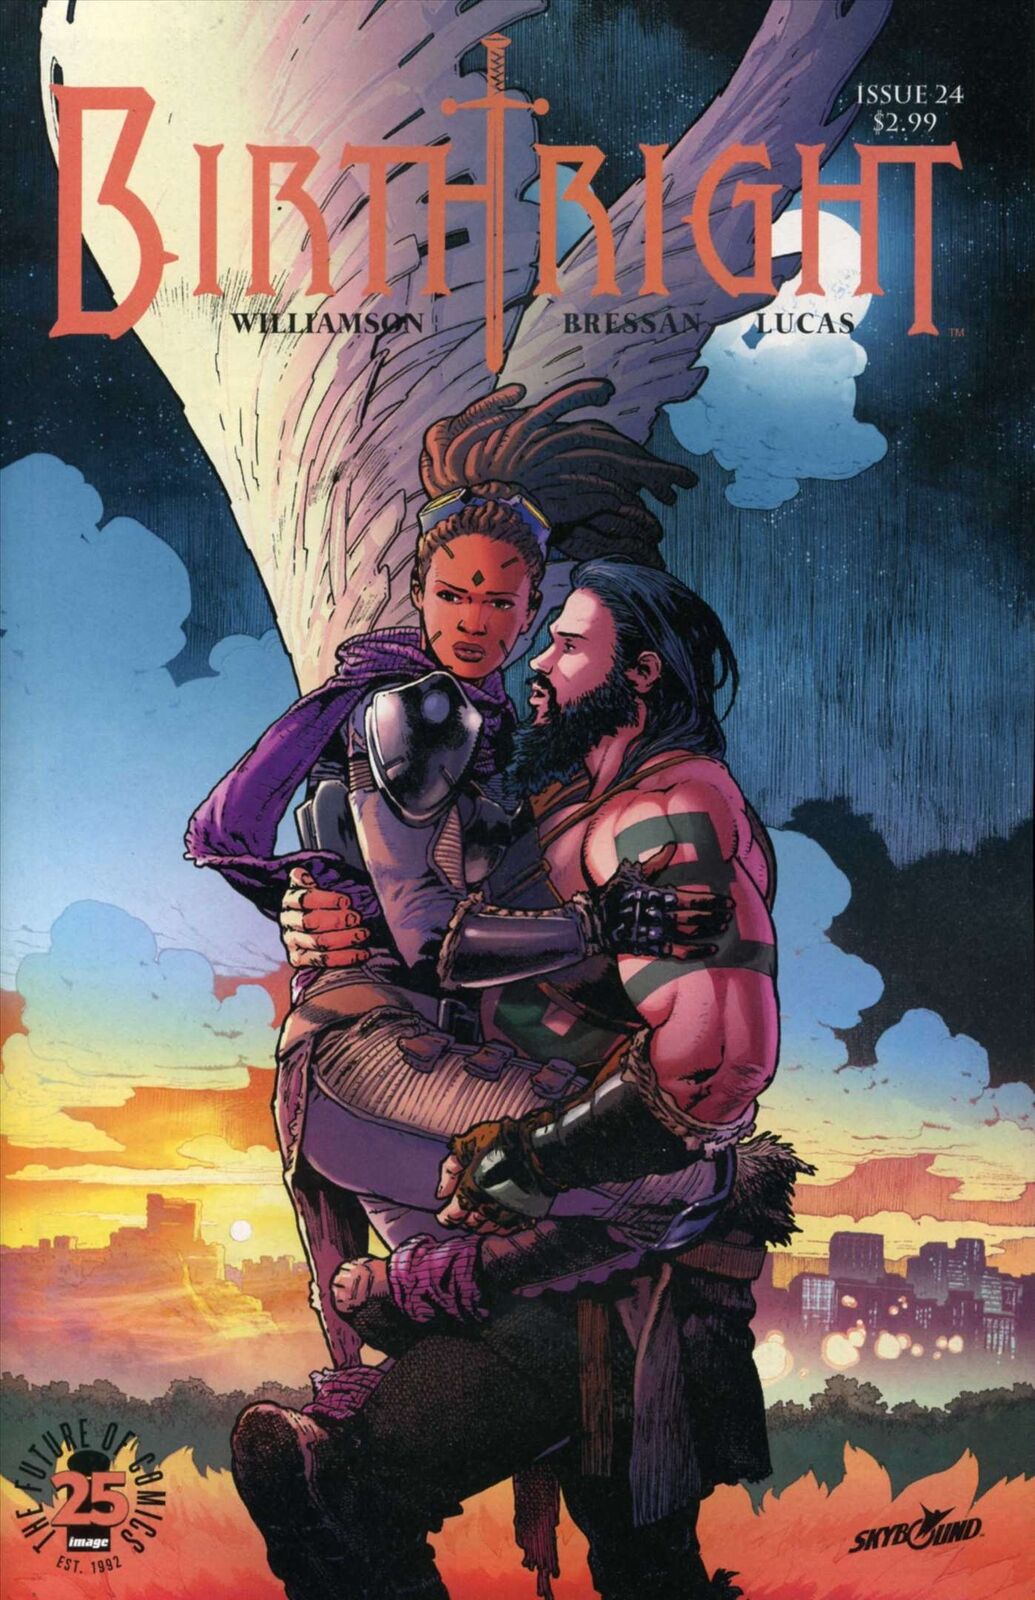 Birthright (Image) #24 VF/NM; Image | Skybound - we combine shipping